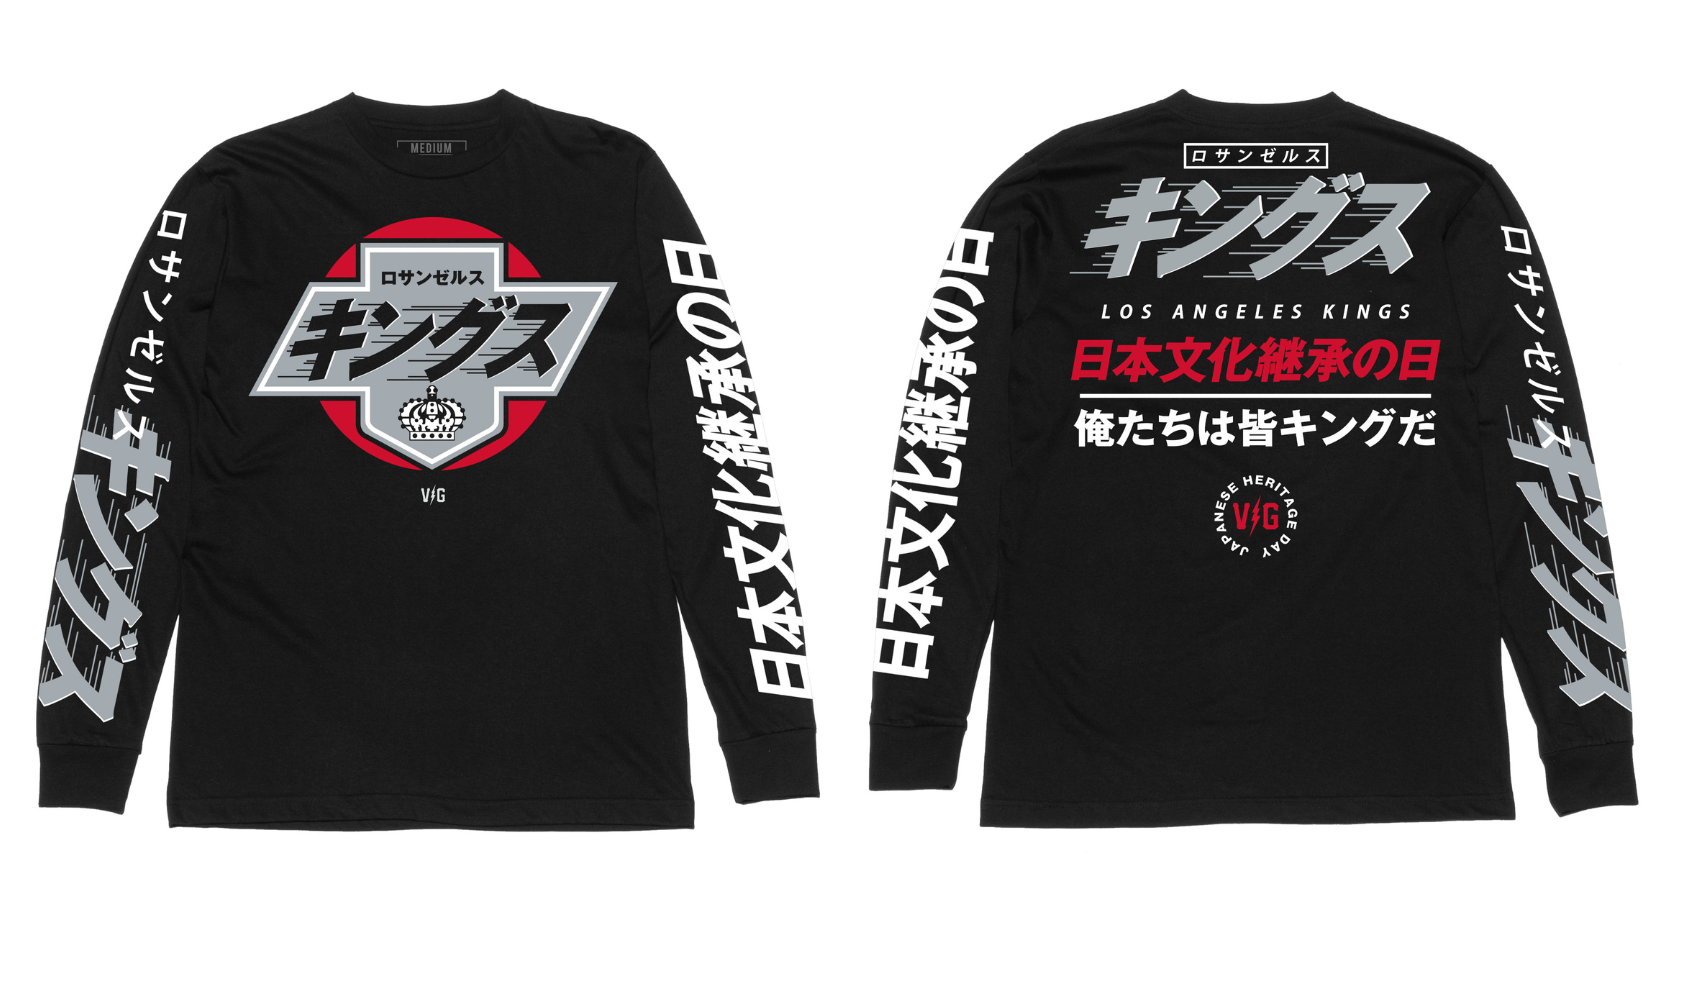 Violent Gentlemen and the NHL Los Angeles Kings teamed up to create some special pieces for Japanese Heritage Night. The classic Kings 90’s heritage logo translated to Japanese sits on top of the red dot of the Rising Sun Flag. VG collaborated with Japanese language design experts at RuckingFotten to ensure a grammatically correct, beautiful piece of art.